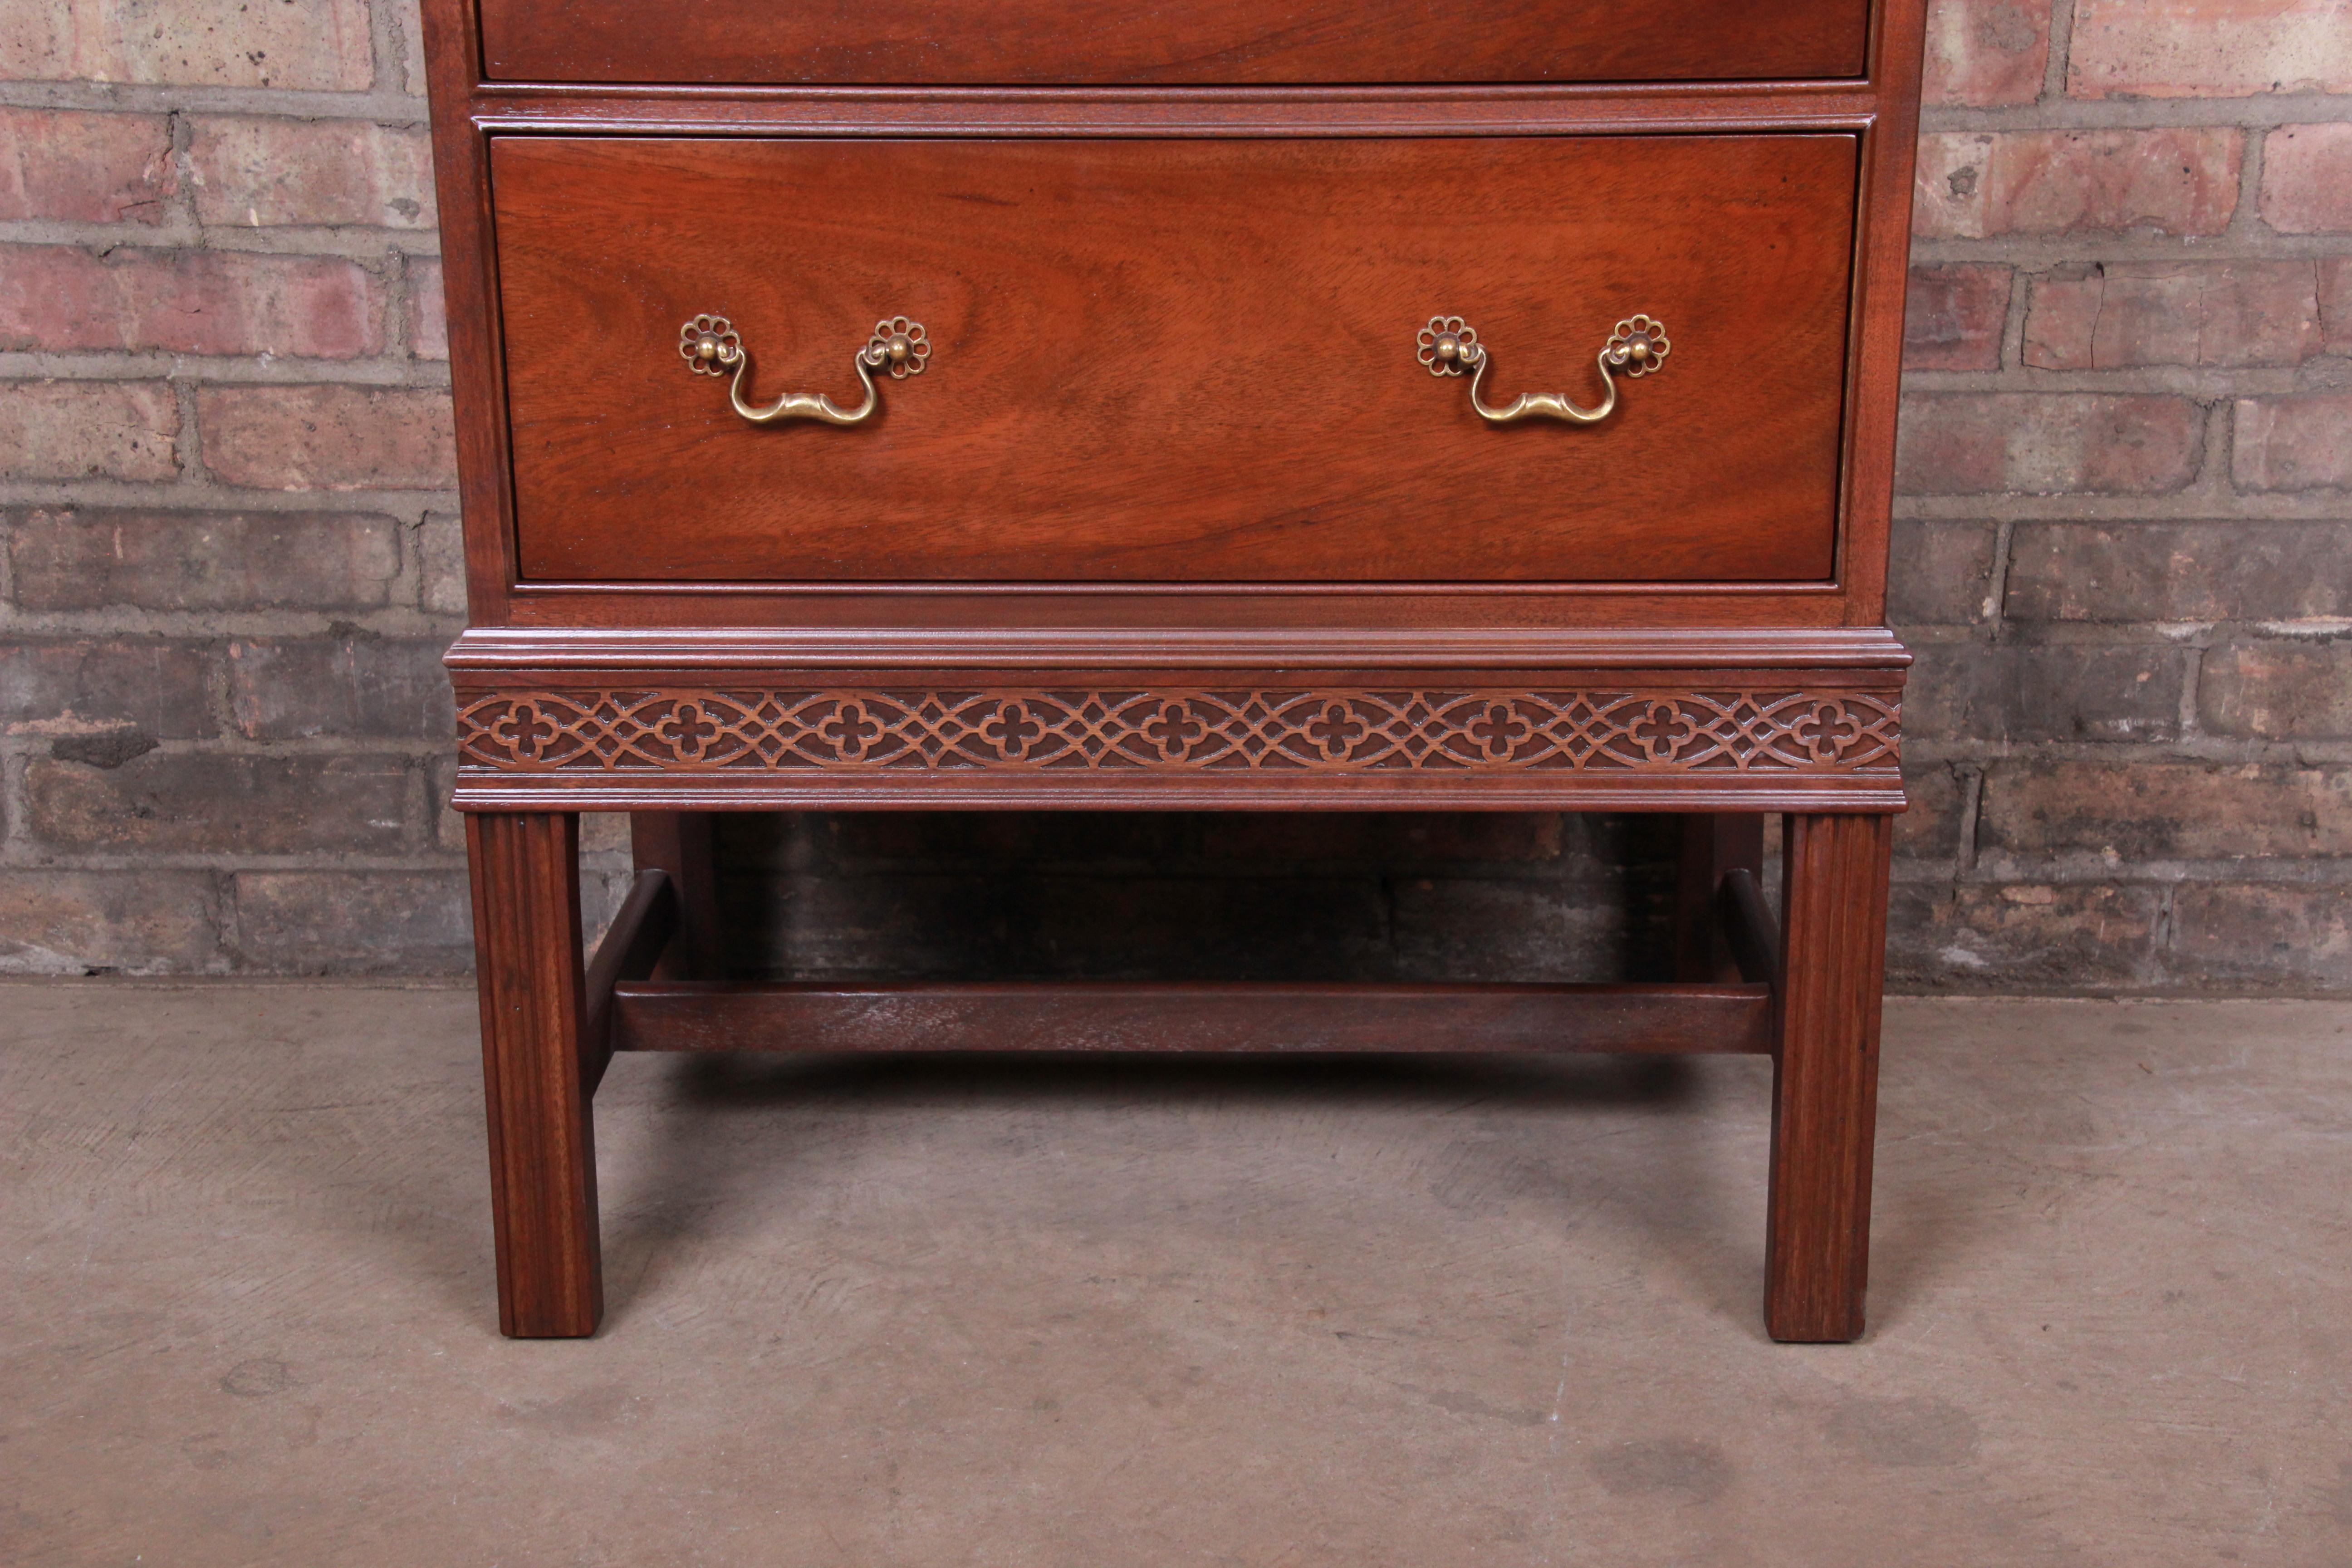 20th Century Henredon Chippendale Mahogany Lingerie Chest or Semainier, Newly Refinished